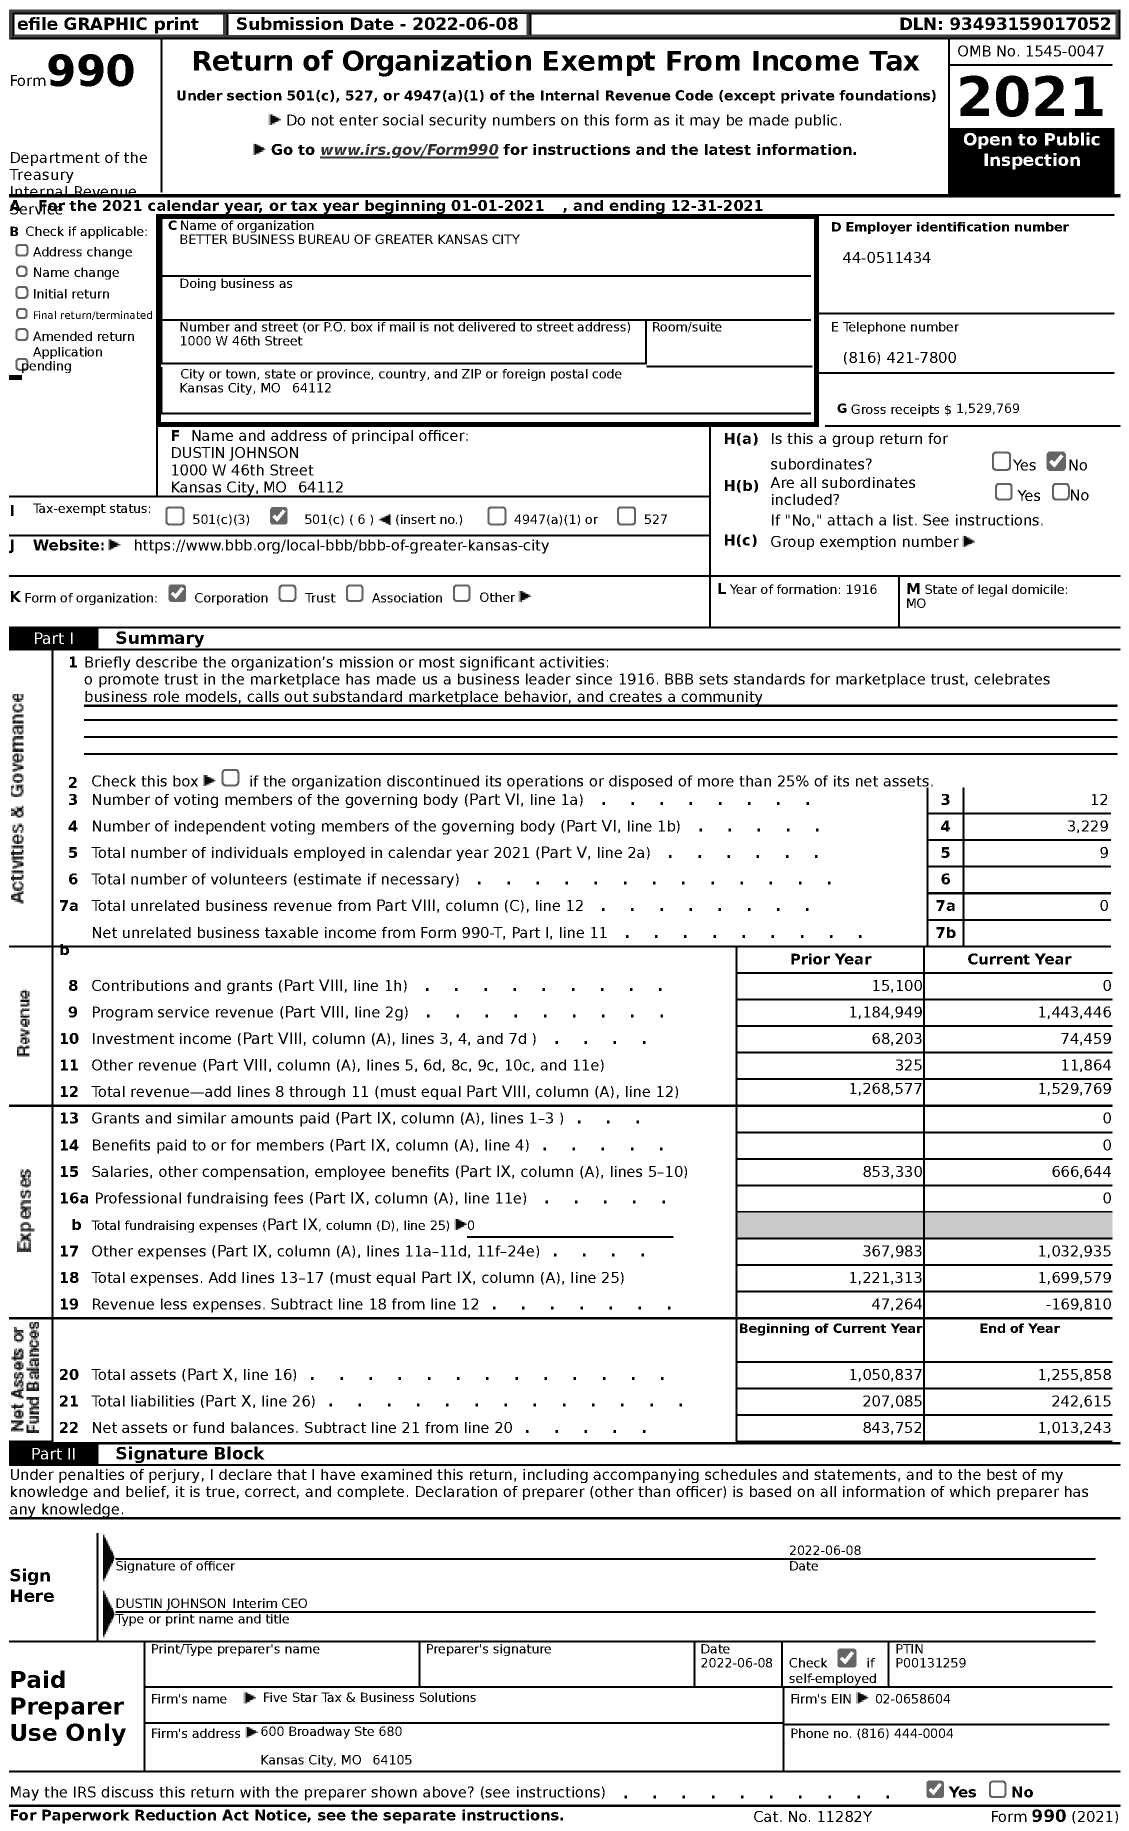 Image of first page of 2021 Form 990 for Better Business Bureau of Greater Kansas City (BBB)